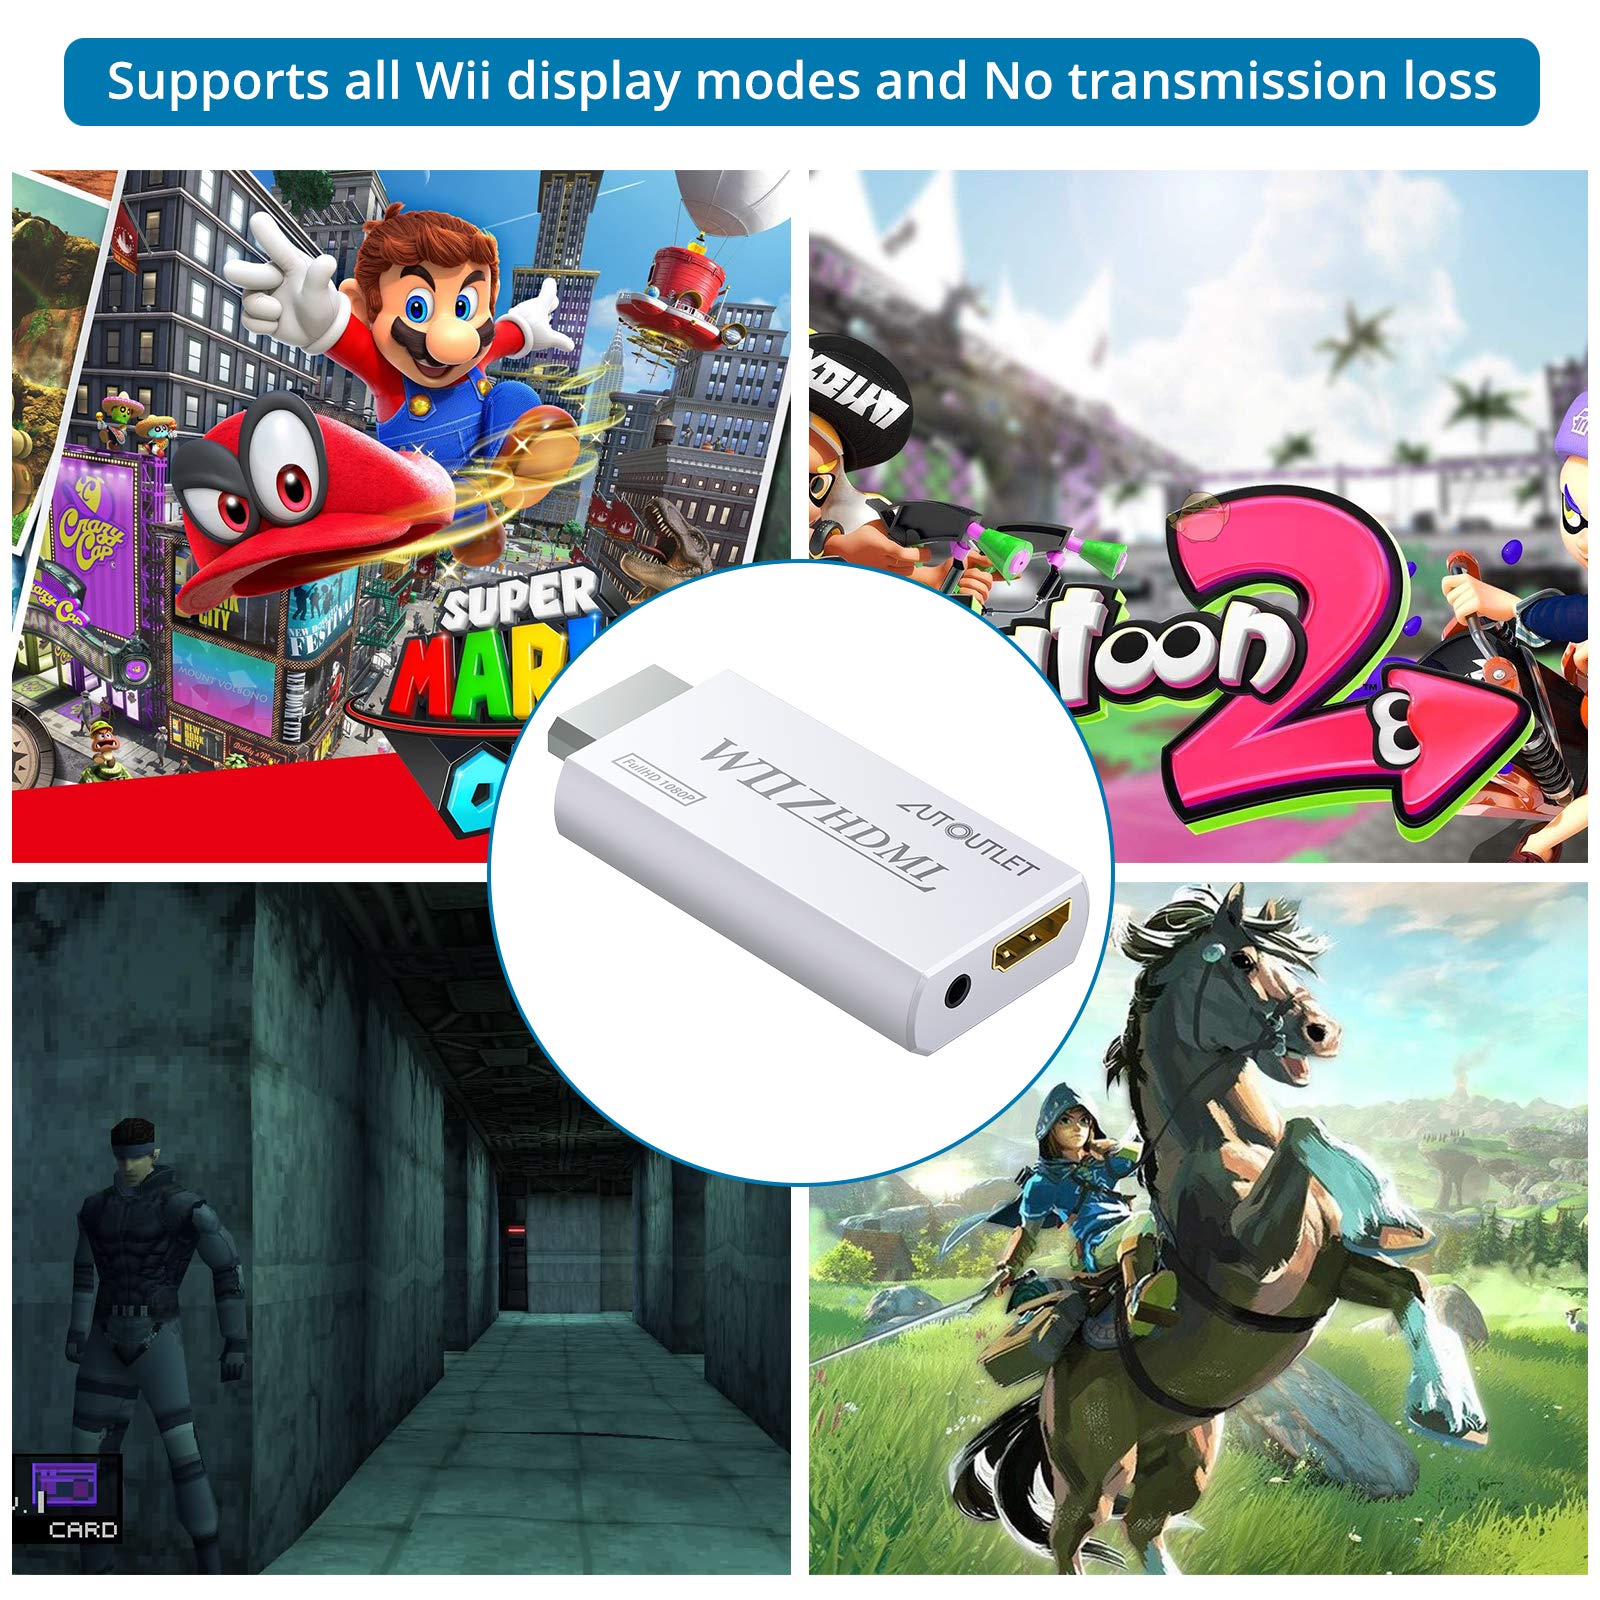 Wii to HDMI Converter 1080P for Full HD Device, Wii HDMI Adapter with 3,5mm Audio Jack&HDMI Output Compatible with Nintendo Wii, Wii U, HDTV, Monitor-Supports All Wii Display Modes 720P